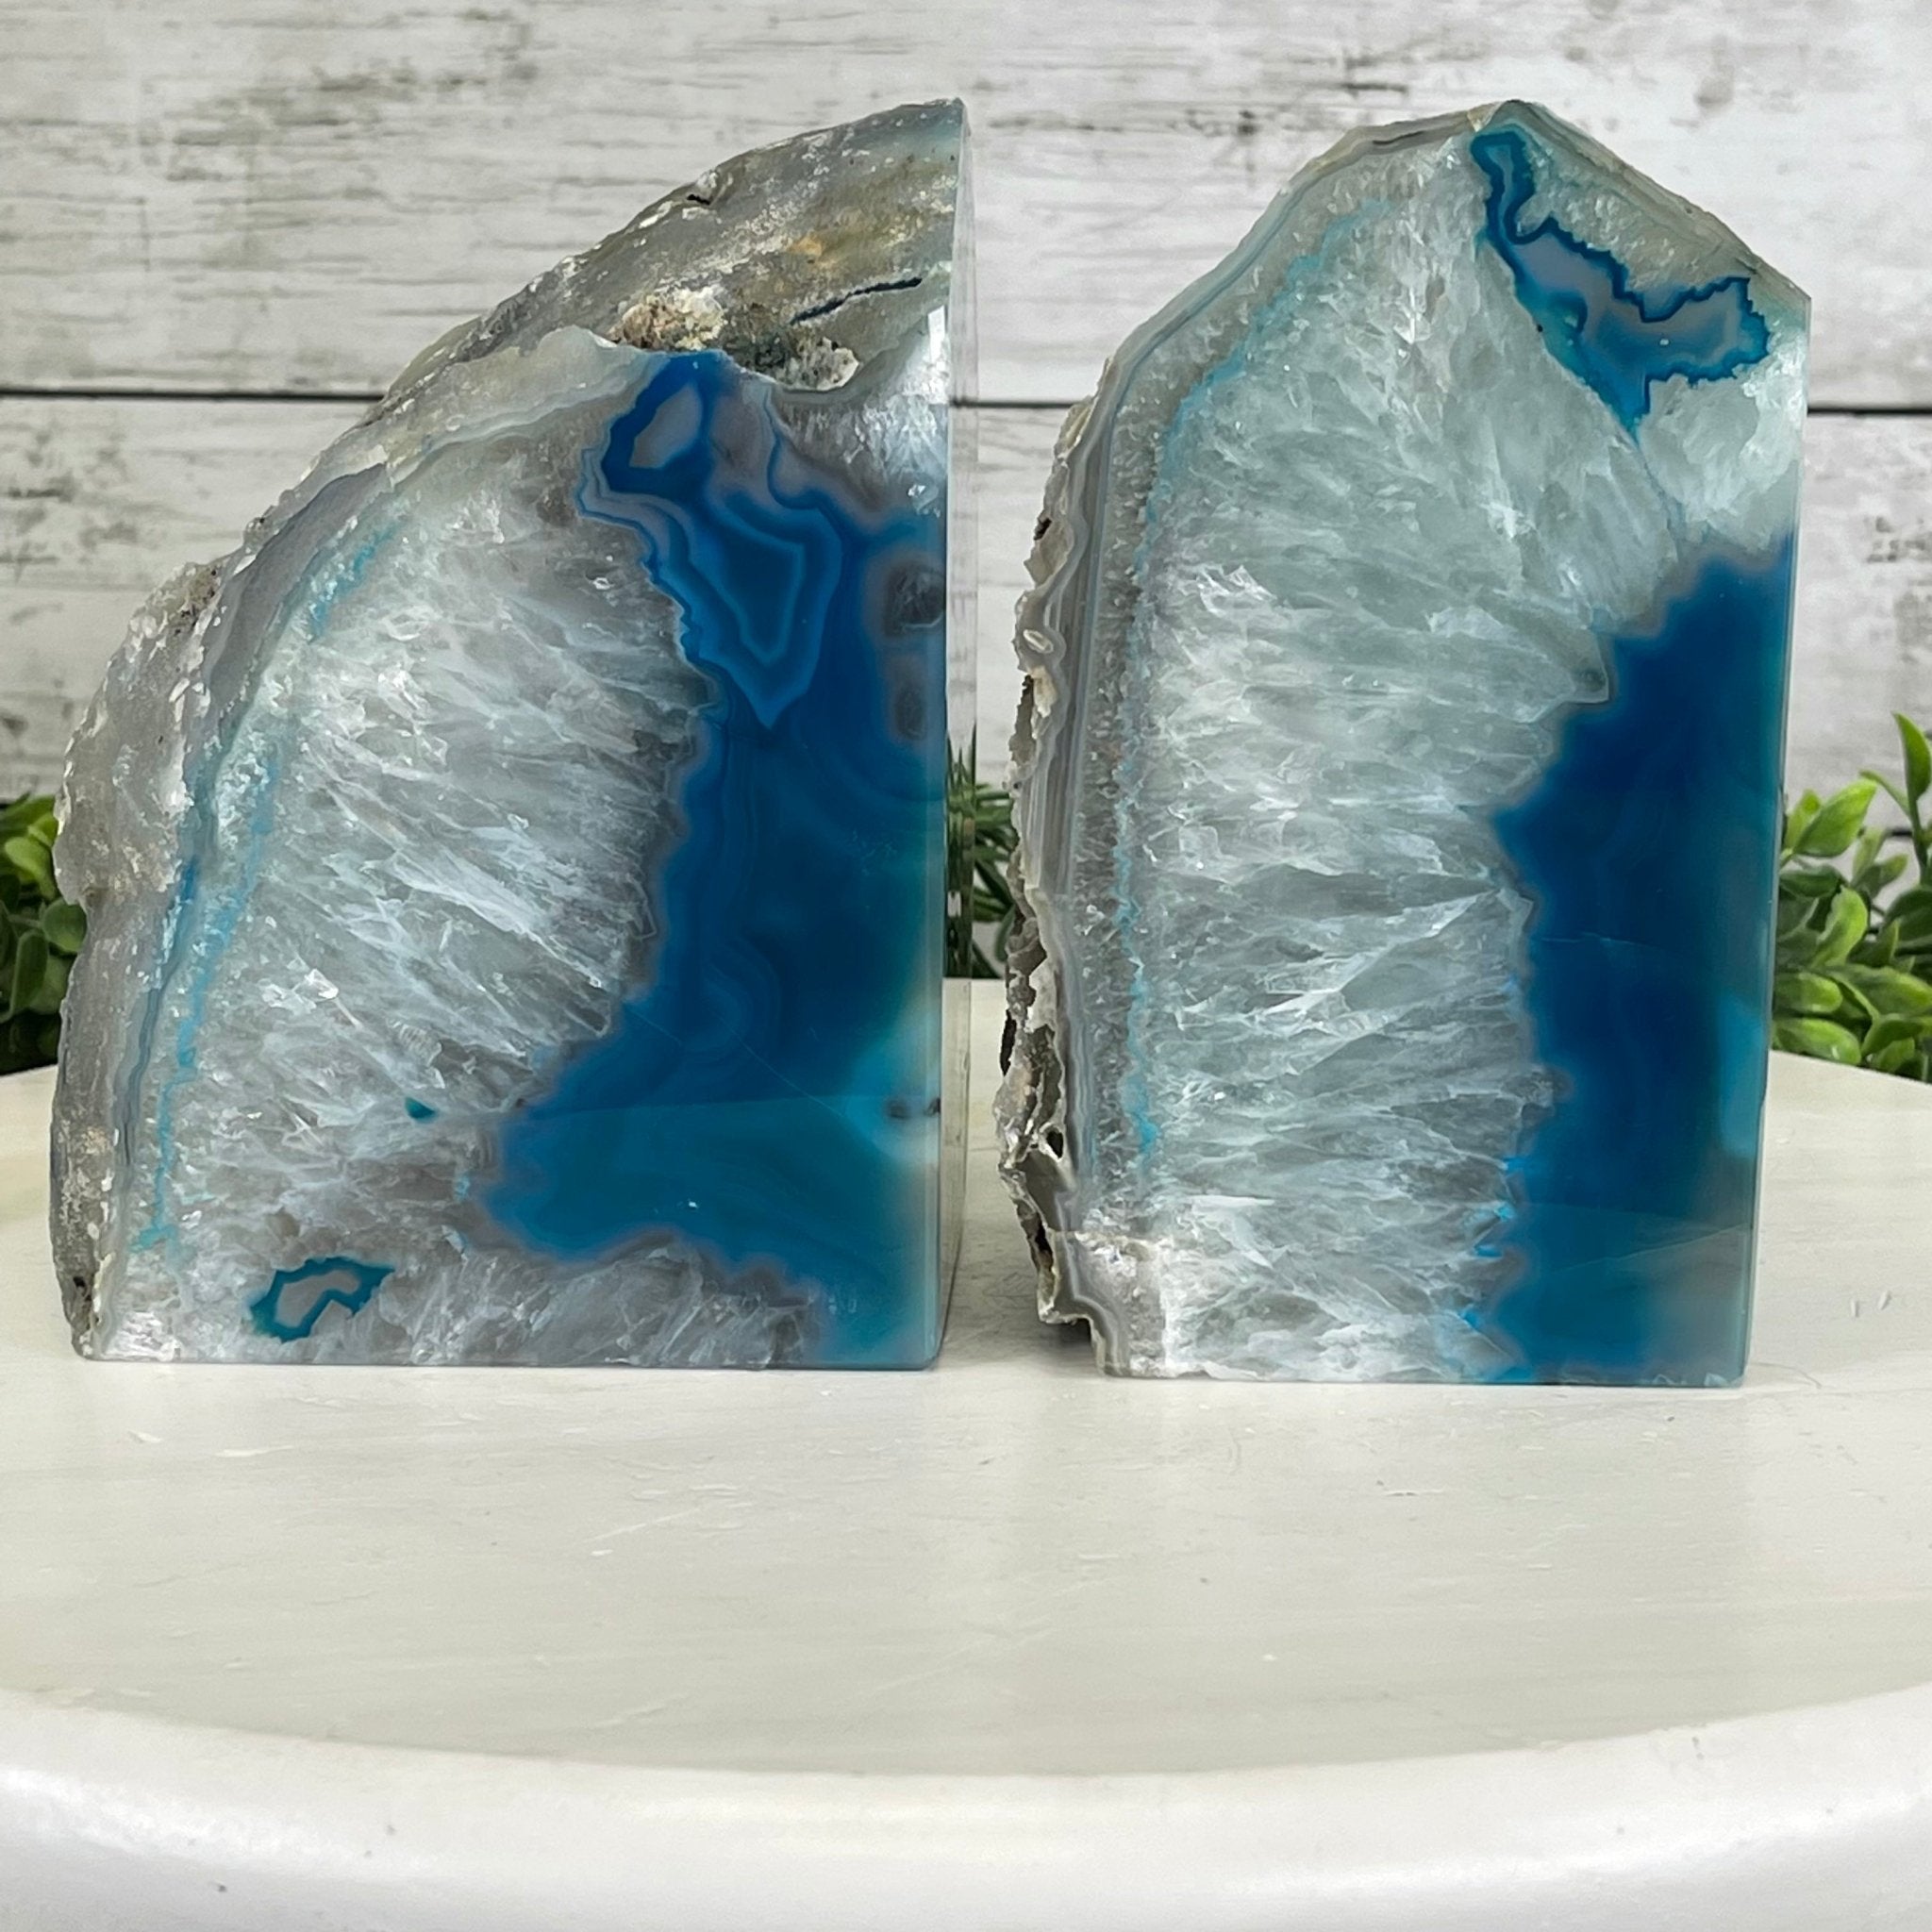 Teal Dyed Brazilian Agate Stone Bookends, 11.5 lbs & 5.8" tall Model #5151TL-022 by Brazil Gems - Brazil GemsBrazil GemsTeal Dyed Brazilian Agate Stone Bookends, 11.5 lbs & 5.8" tall Model #5151TL-022 by Brazil GemsBookends5151TL-022